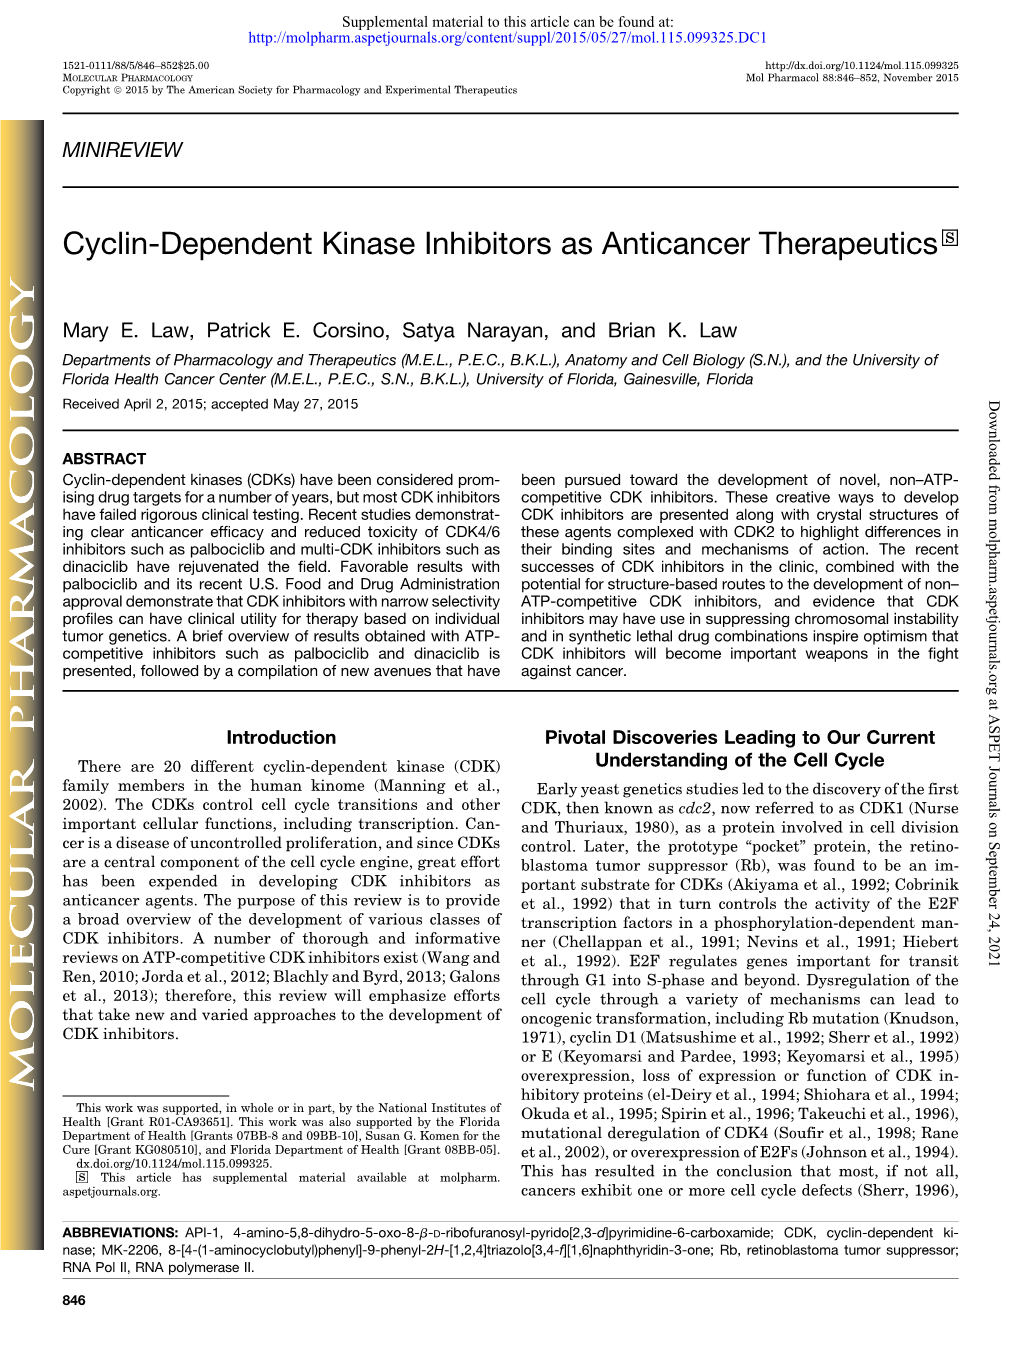 Cyclin-Dependent Kinase Inhibitors As Anticancer Therapeutics S